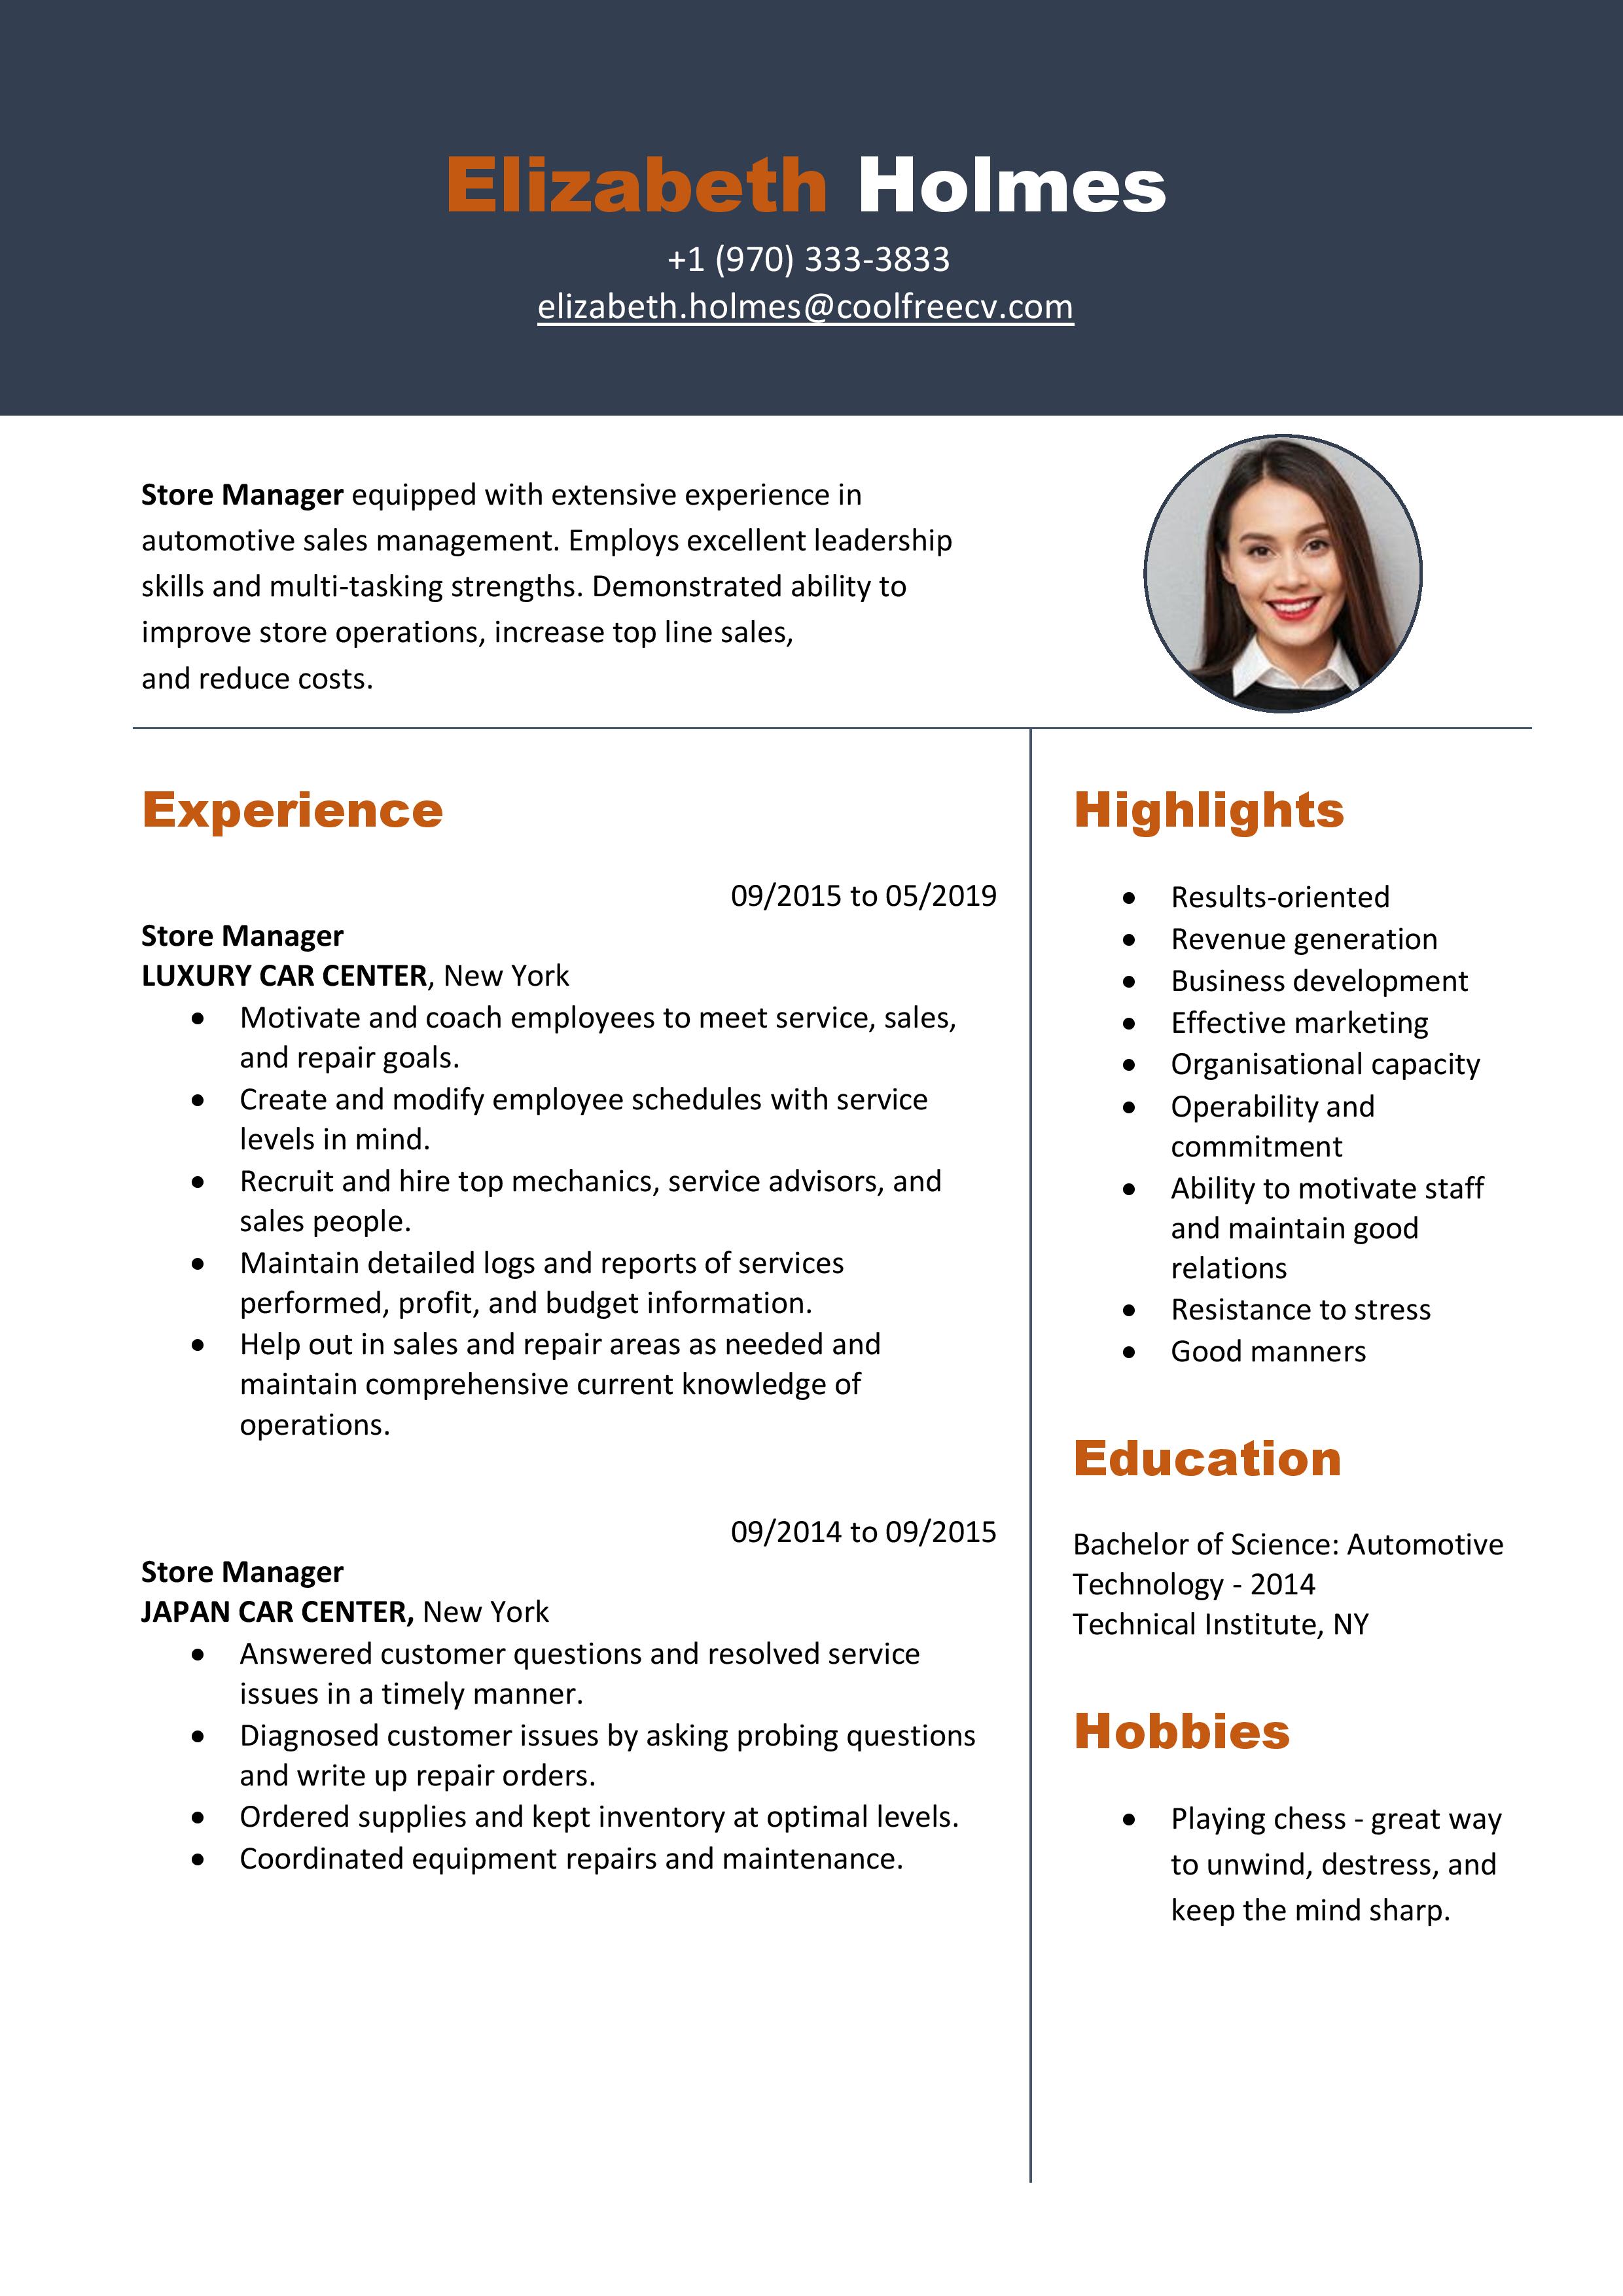 Write professional resume, cv within 21 hour by Sbk_services  Fiverr